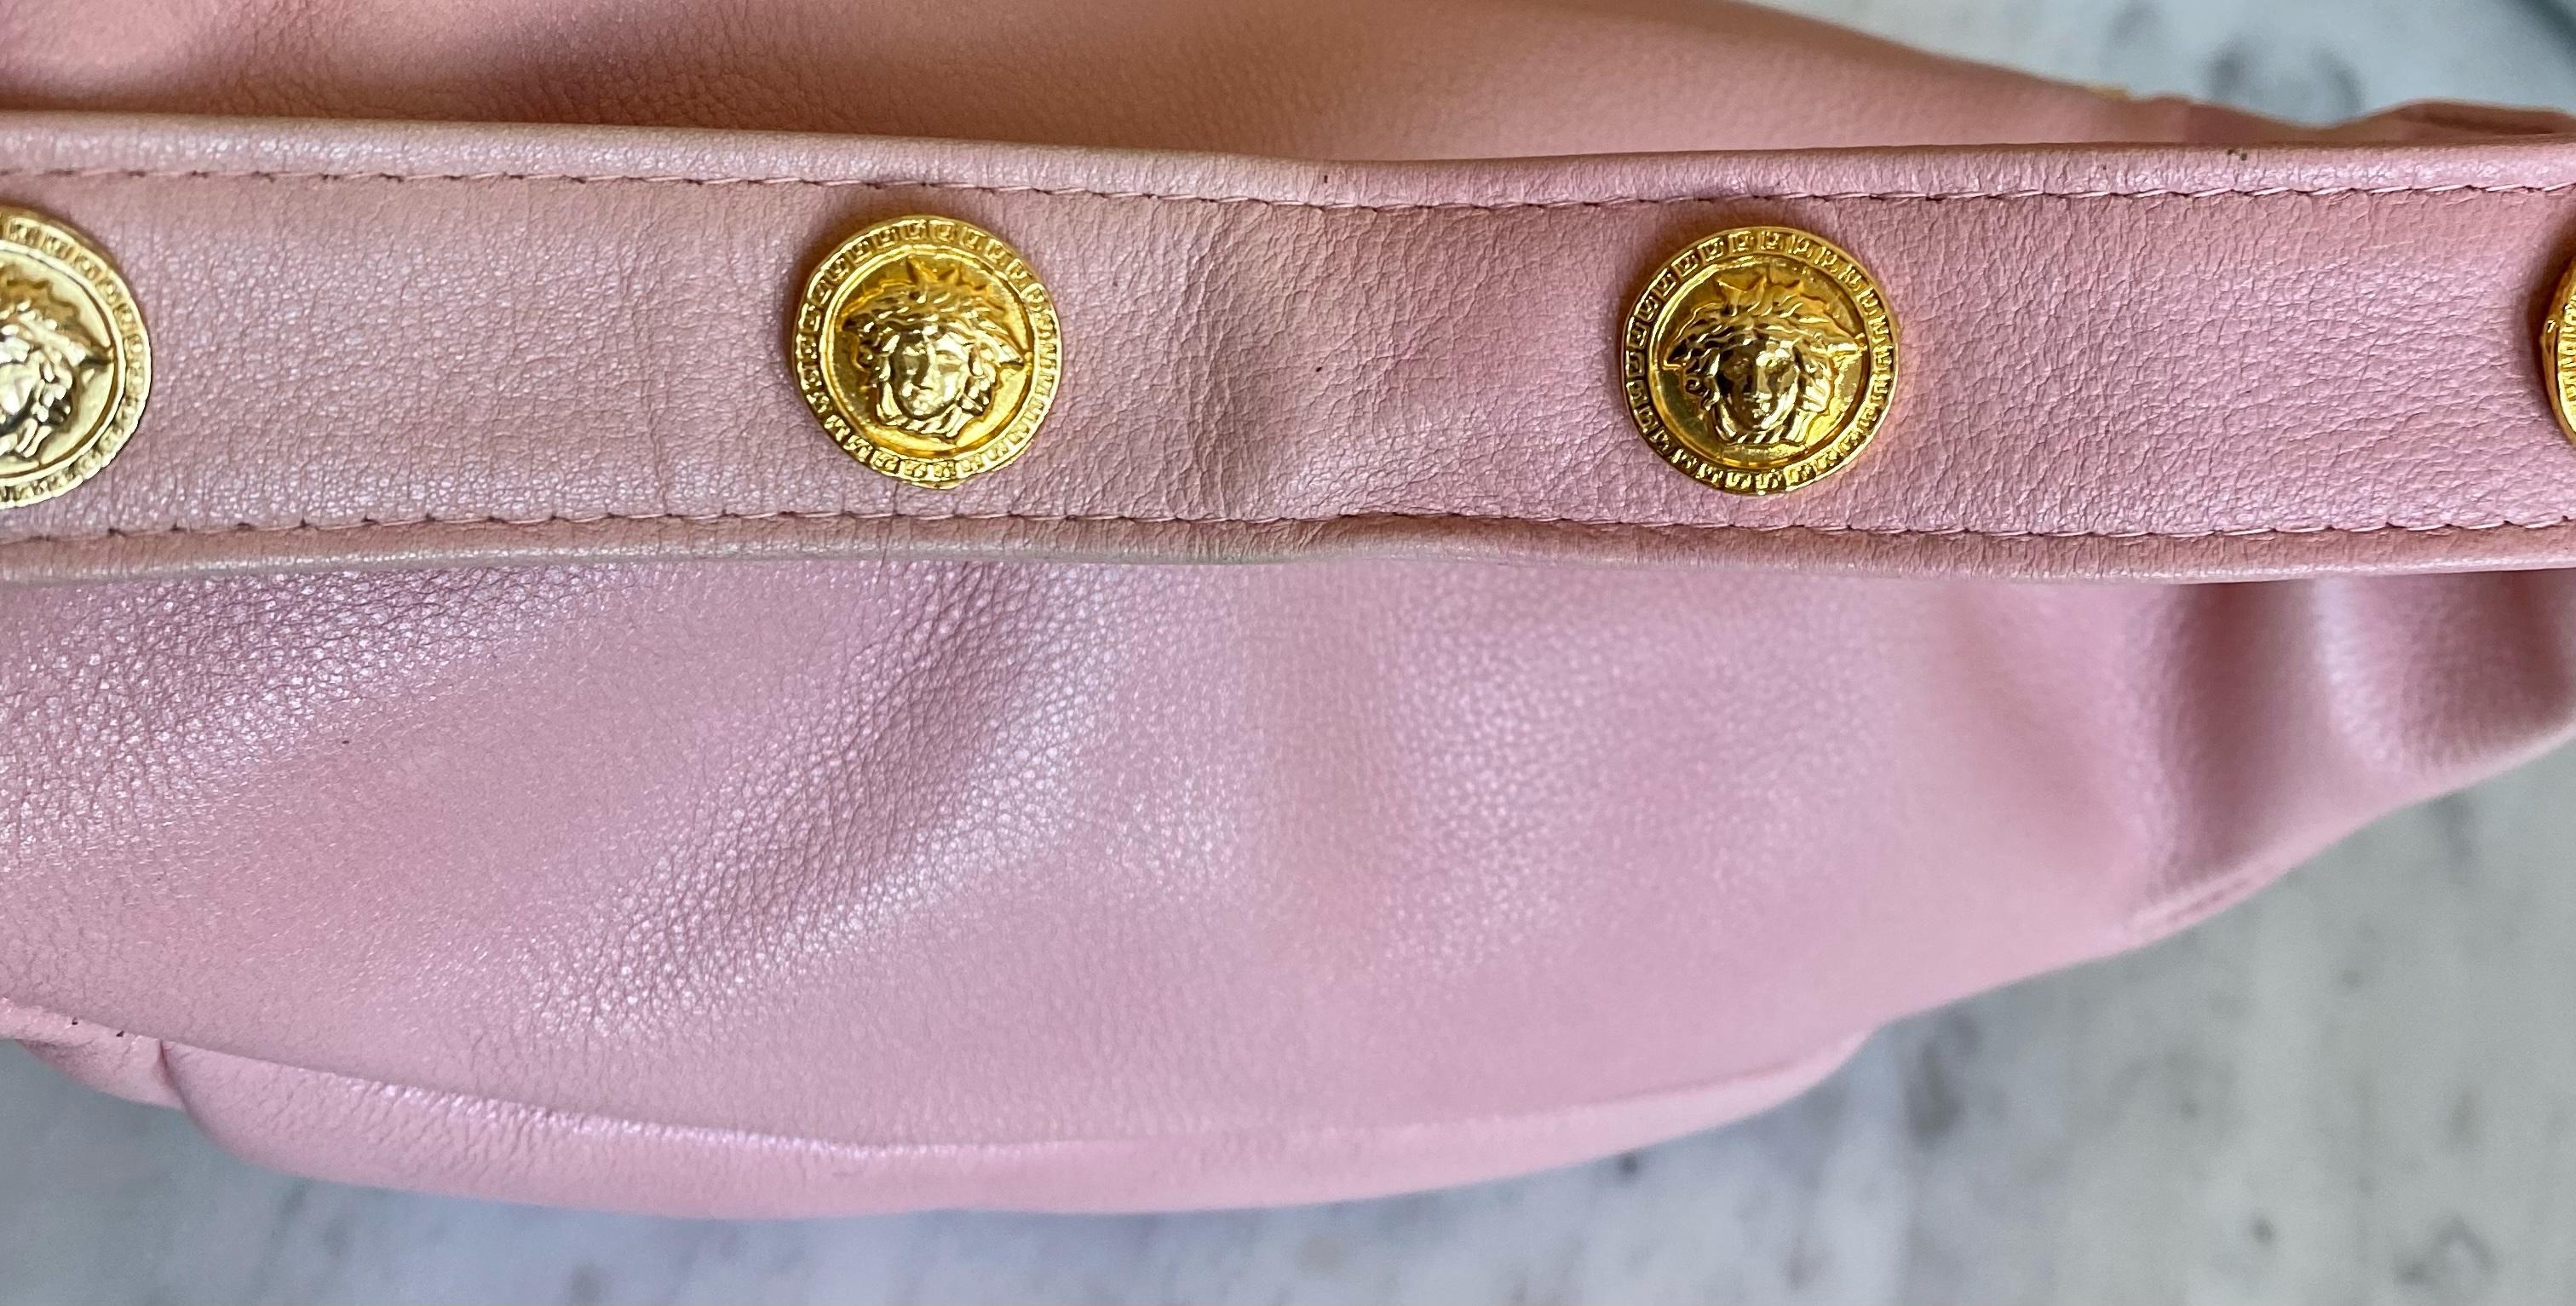 1990s Gianni Versace Couture Light Pink Vintage Fanny Pack Medusa Bum Bag  In Good Condition For Sale In West Hollywood, CA